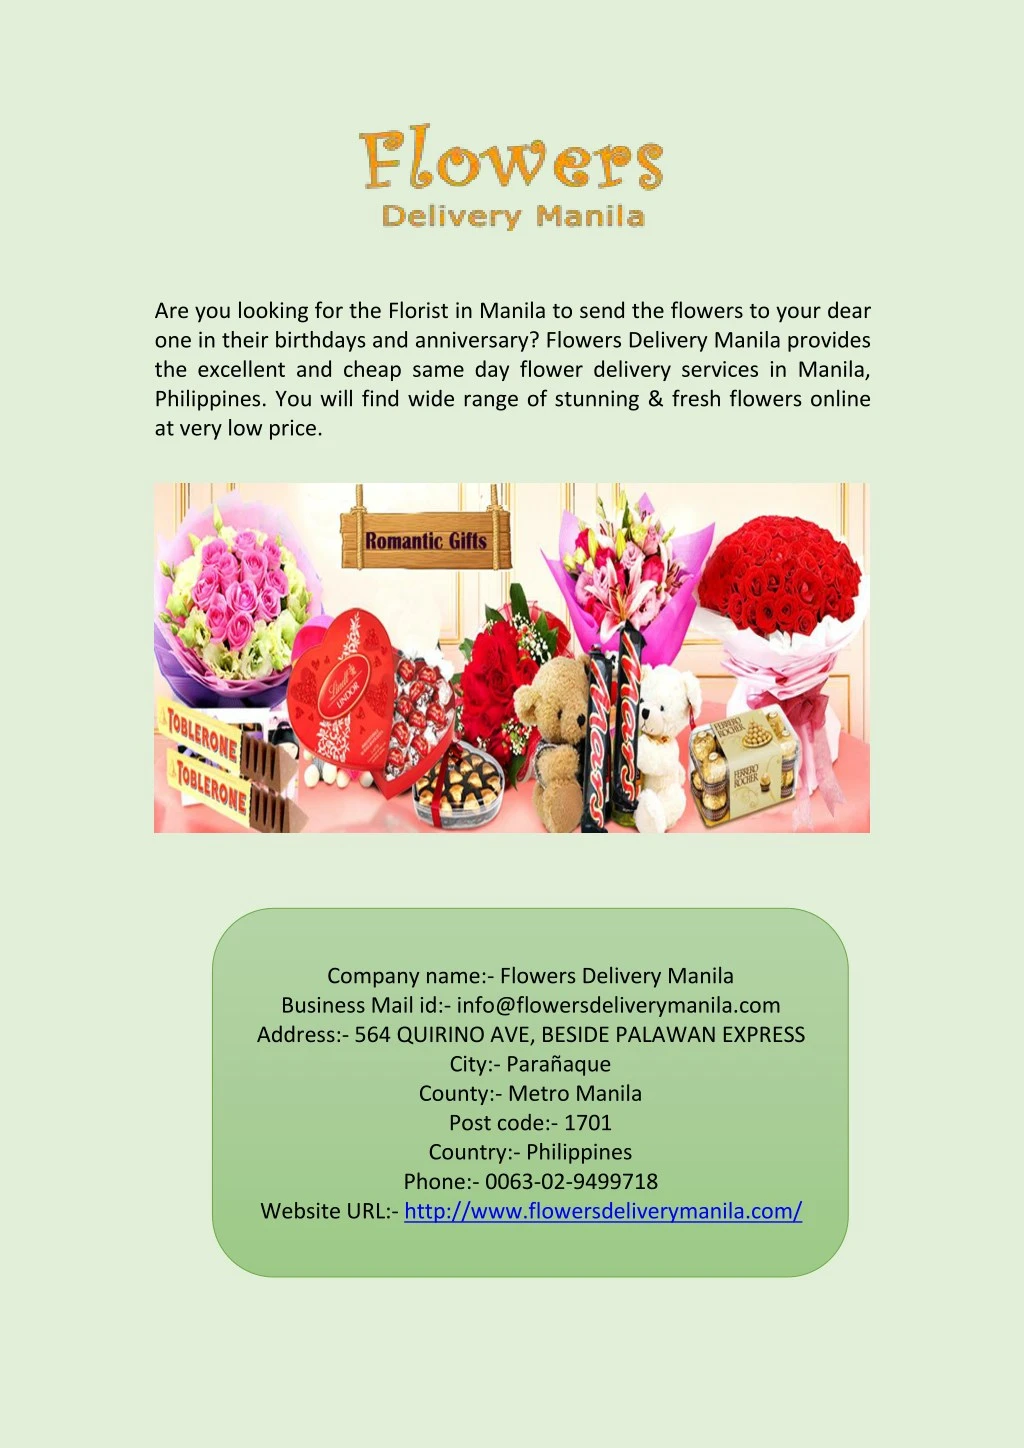 are you looking for the florist in manila to send